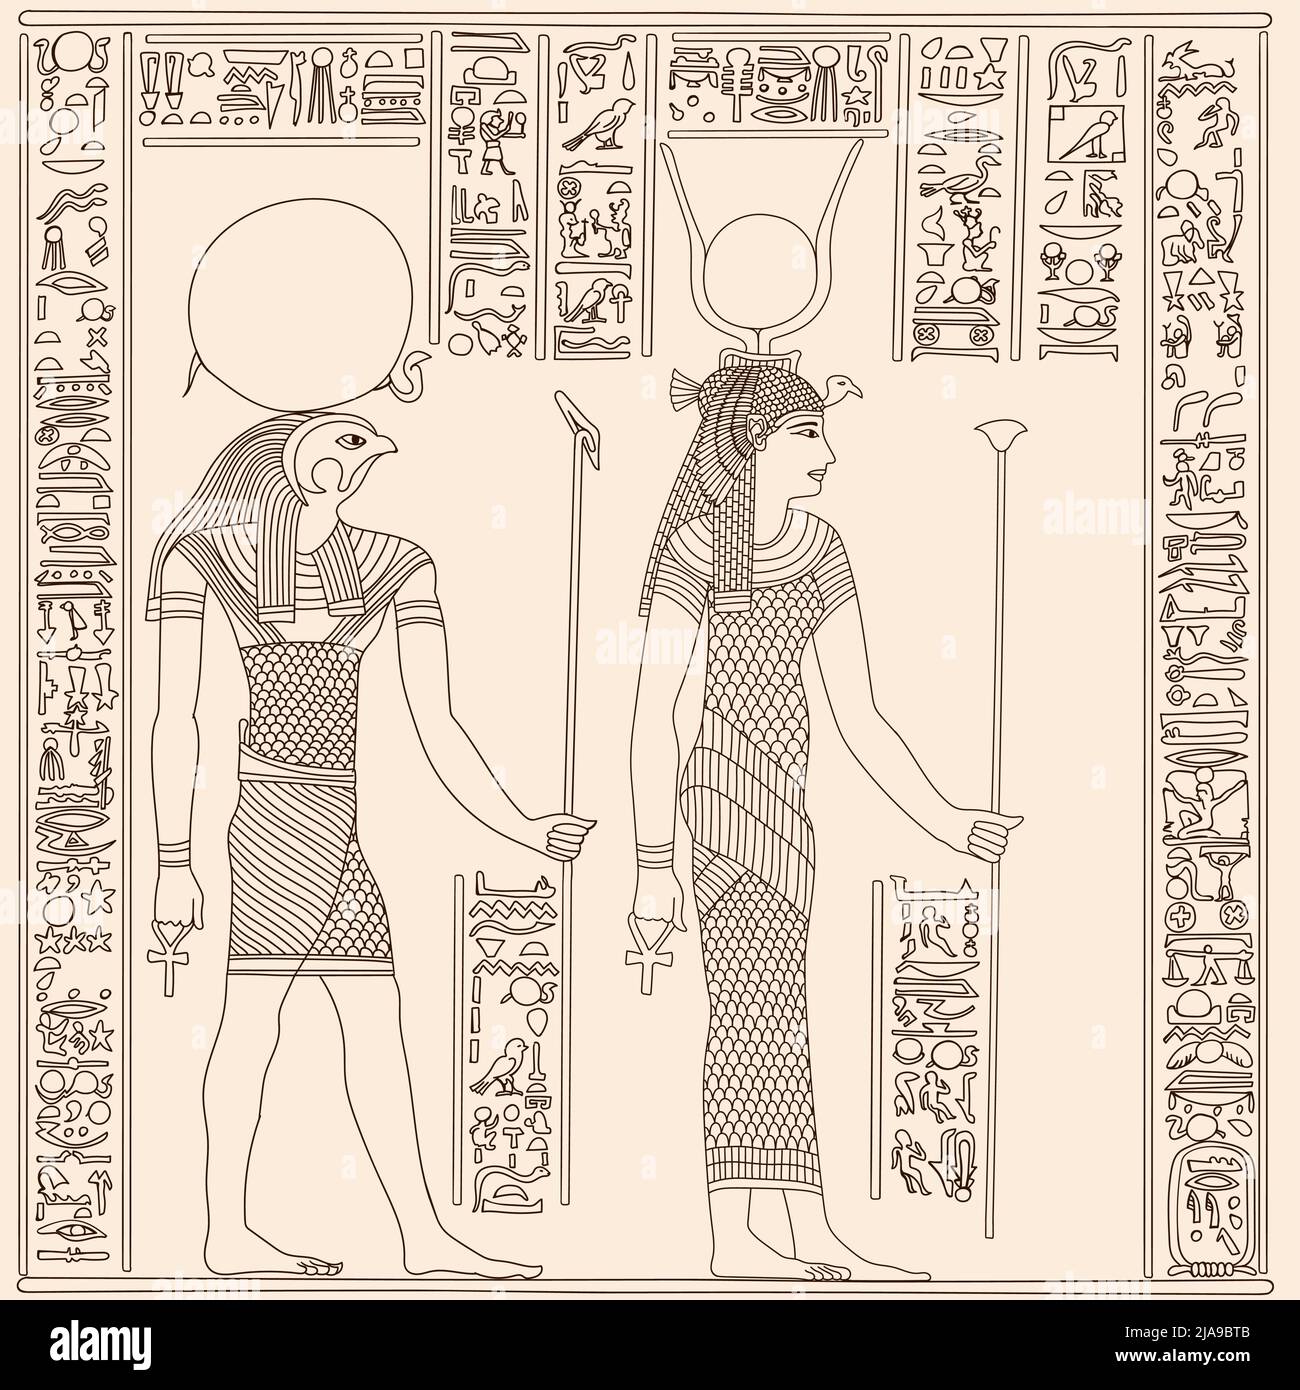 Ancient Egyptian papyrus depicting two figures with scepter in their hands. Hieroglyphs signs and symbols on the wall. Stock Vector